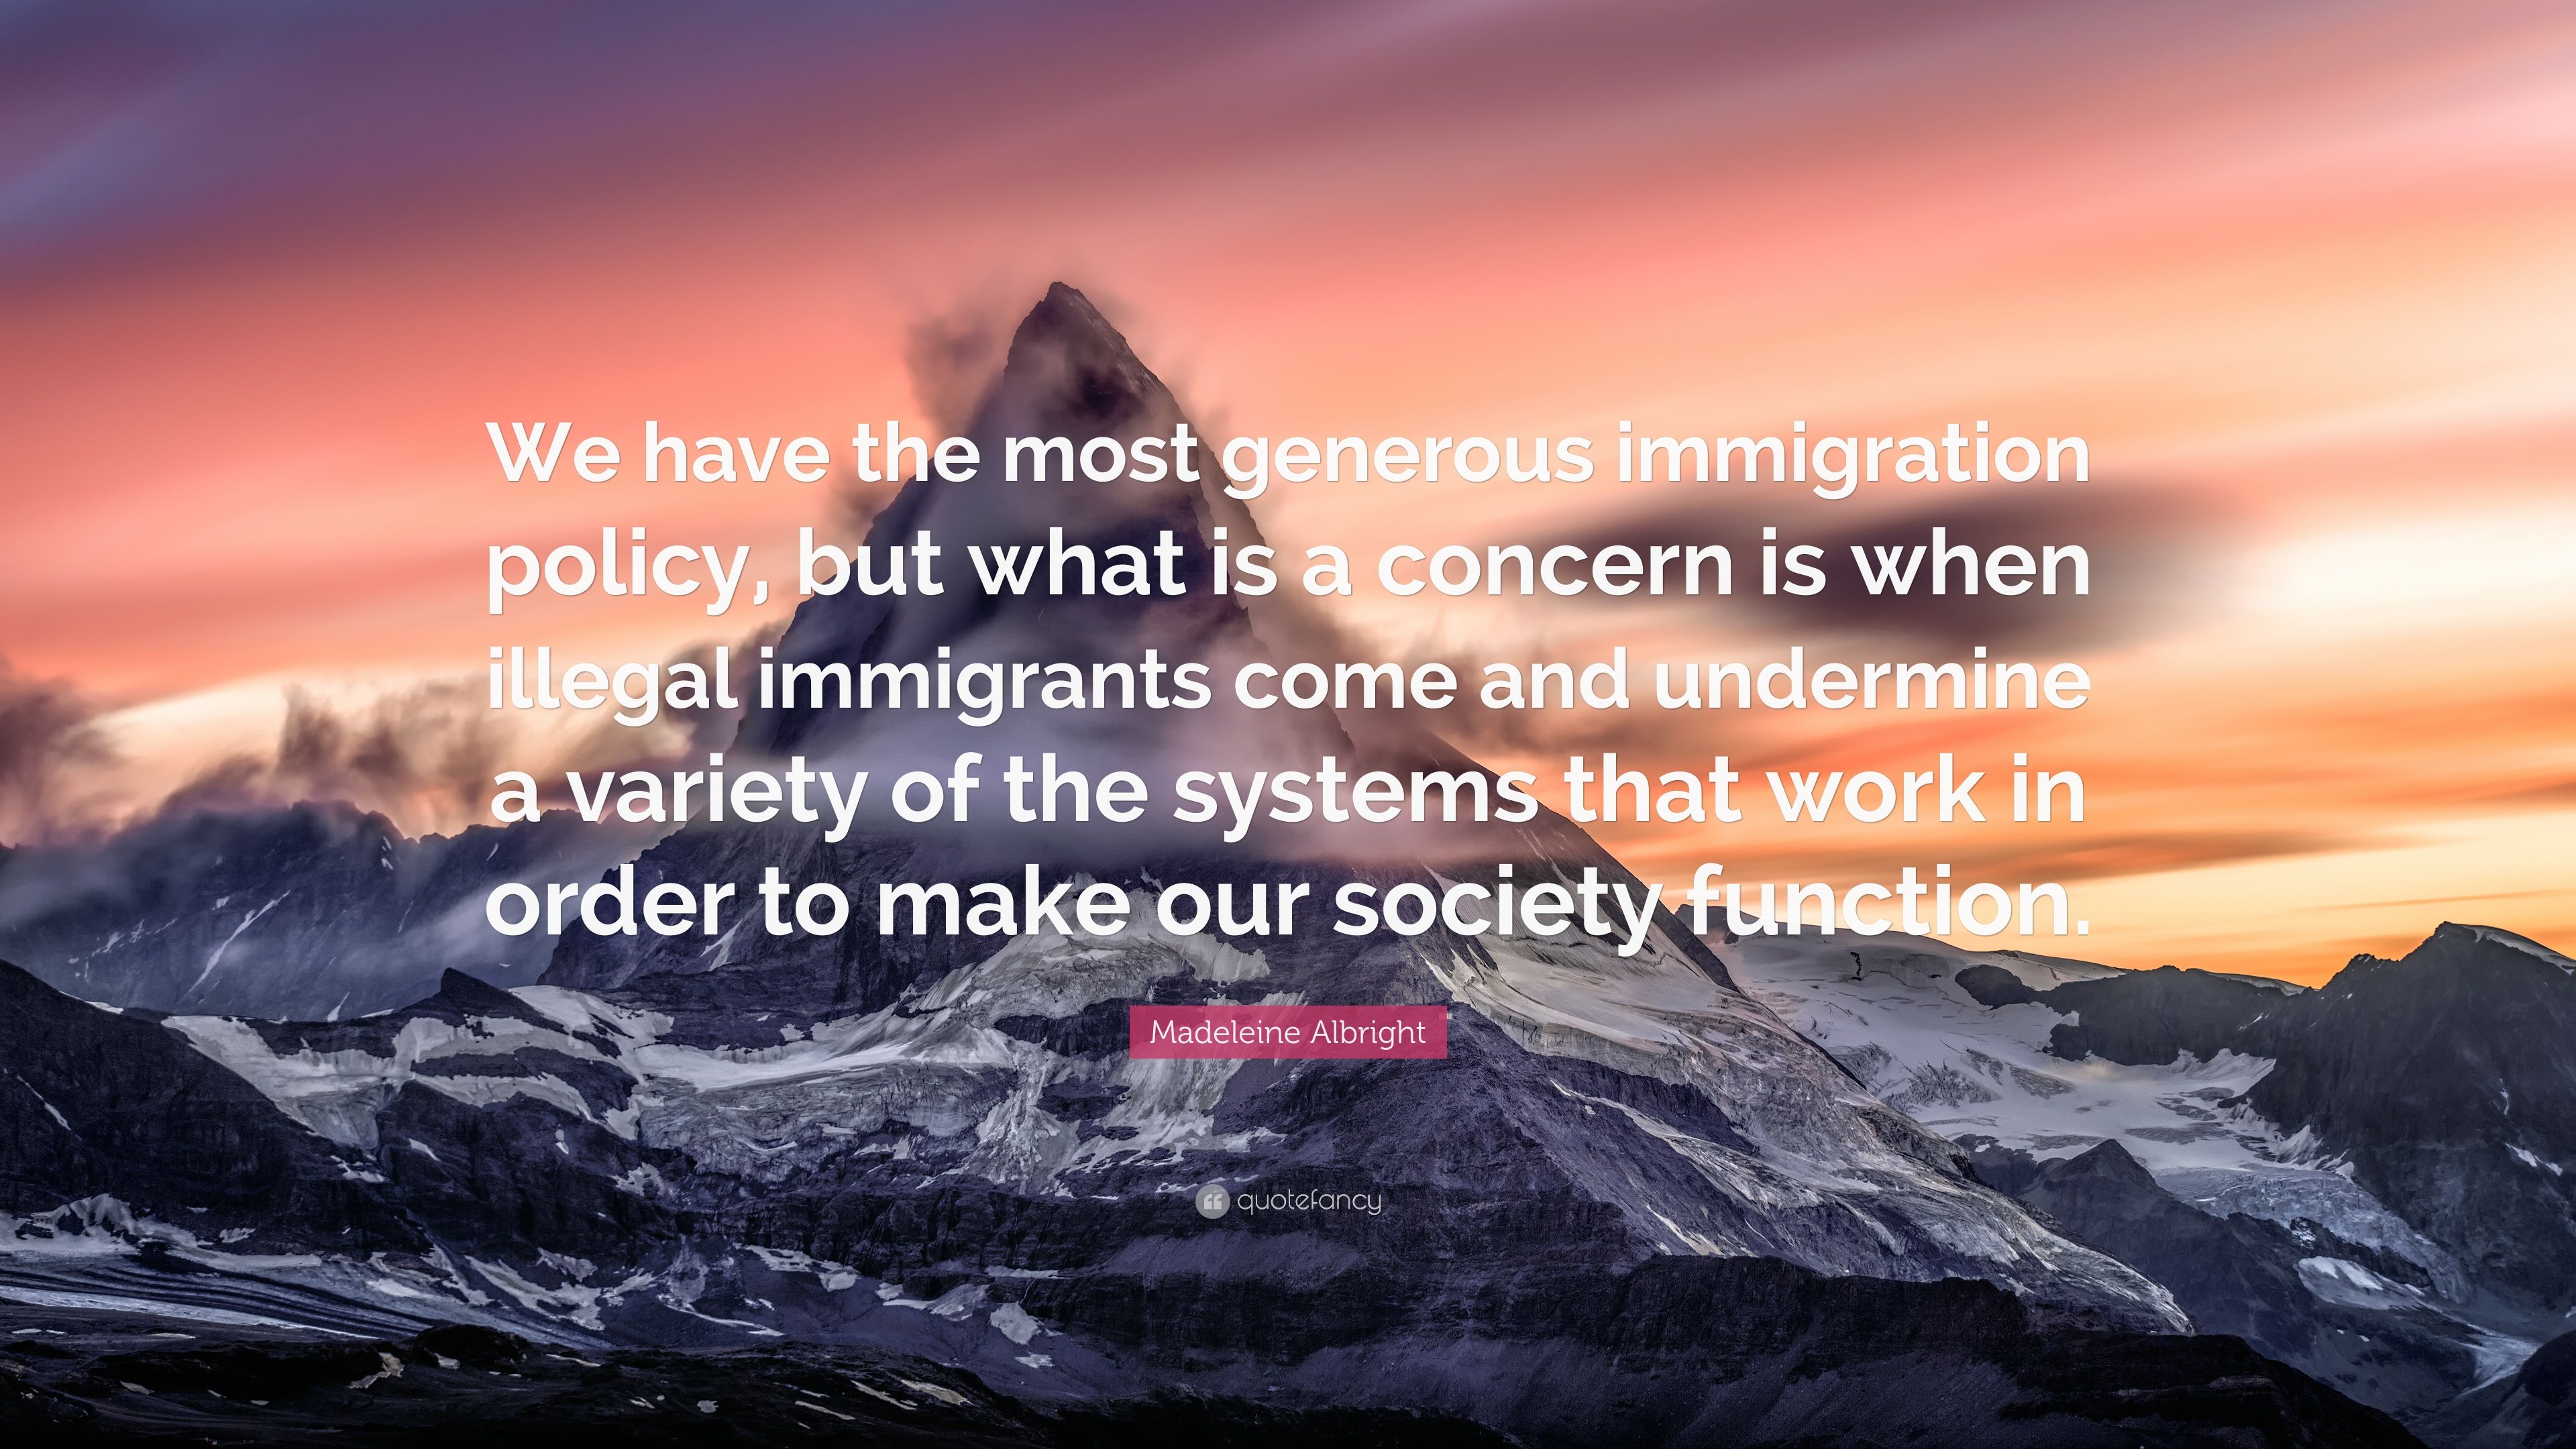 Madeleine Albright Quote: “We have the most generous immigration policy, but what is a concern is when illegal immigrants come and undermine a vari.” (7 wallpaper)